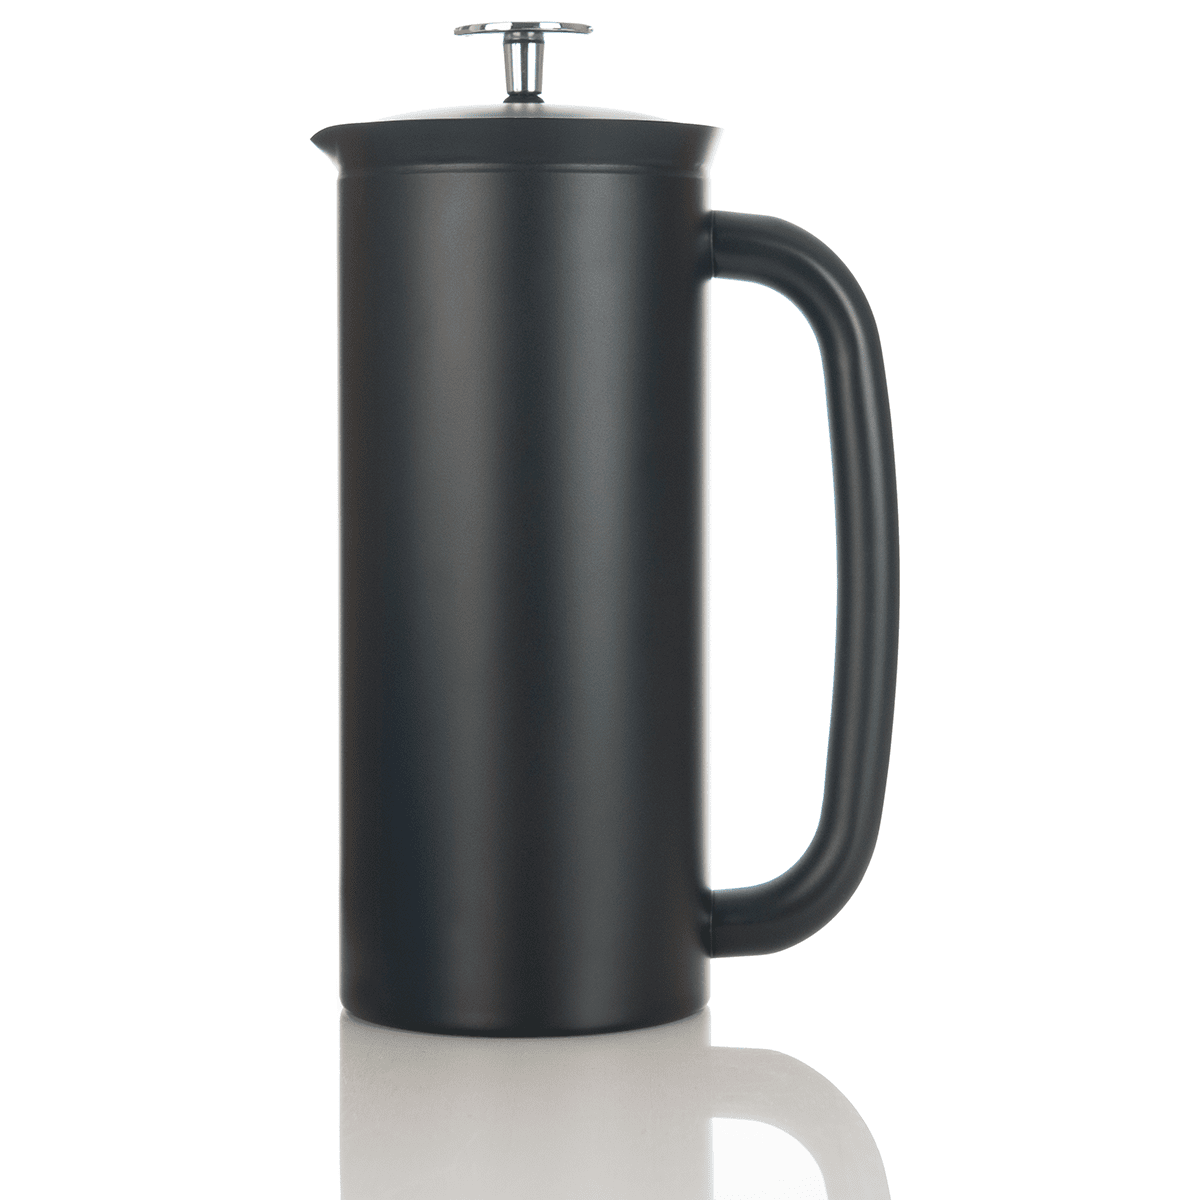 Espro P7 Stainless Steel French Press-18oz - Polished Vacuum Black